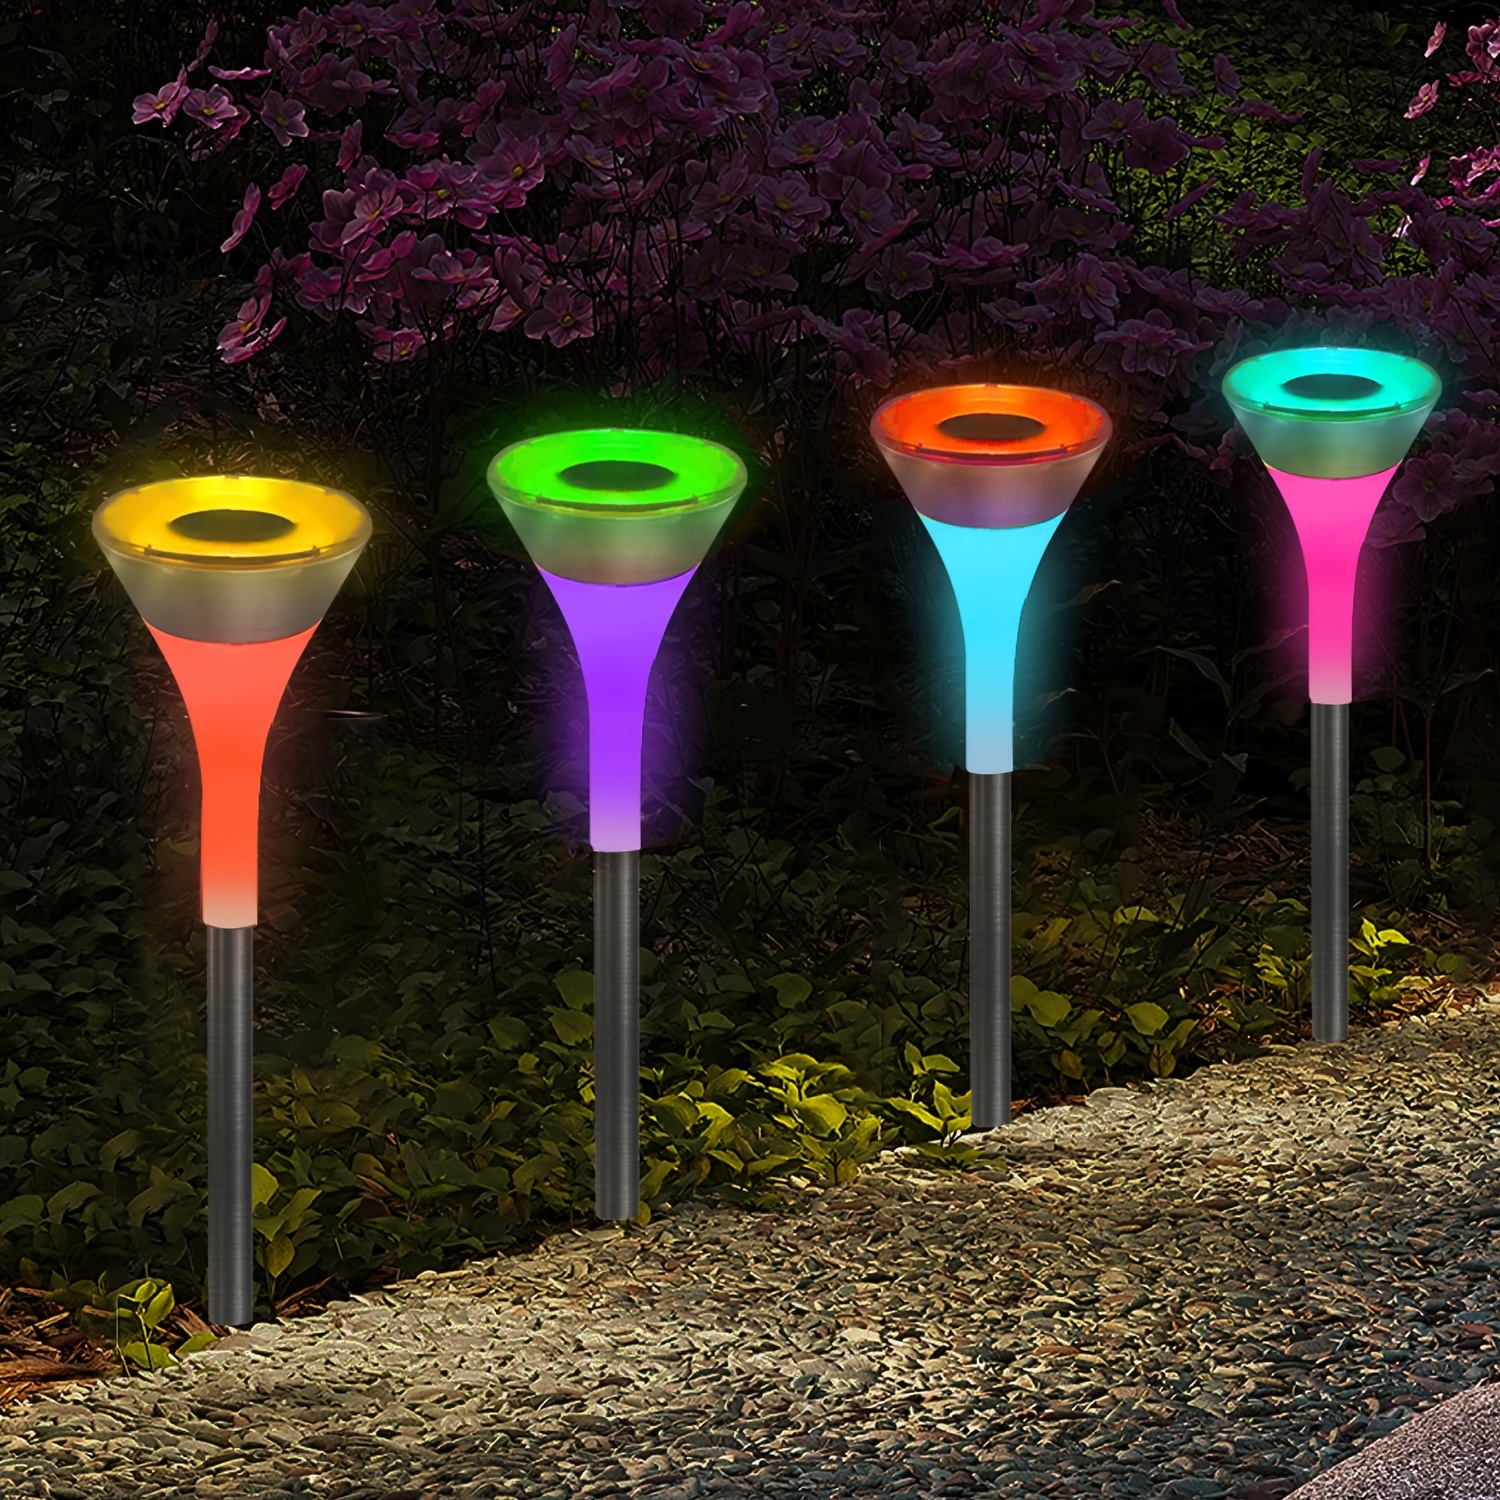 1 4 6pcs Solar Pathway Lights Outdoor Auto 7 Color Changing White Solar Powered Lights Waterproof Decorative LED Path Lights Landscape Lighting For Garden Patio Driveway Walkway